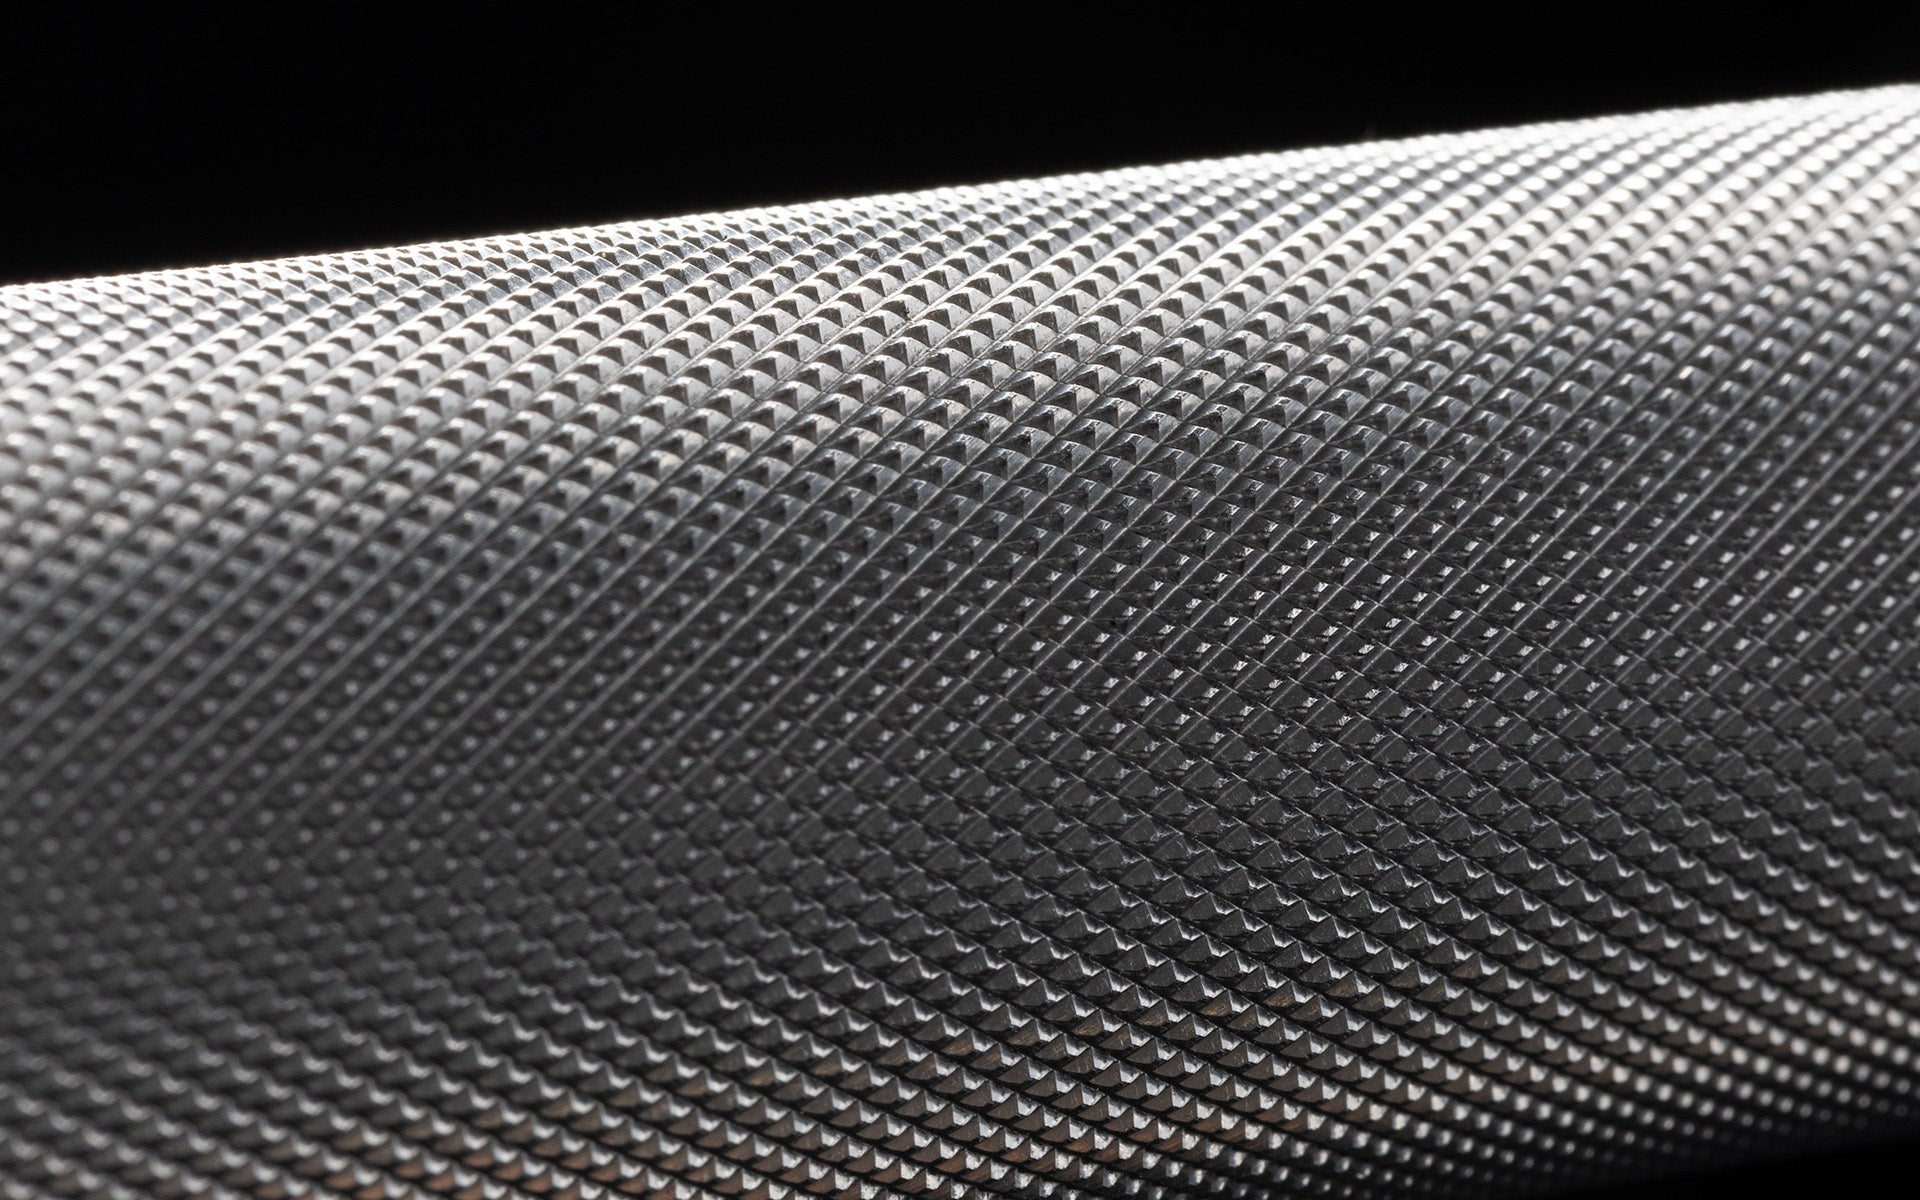 Close-up view of the volcano knurling of the REP 20kg Colorado Bar.